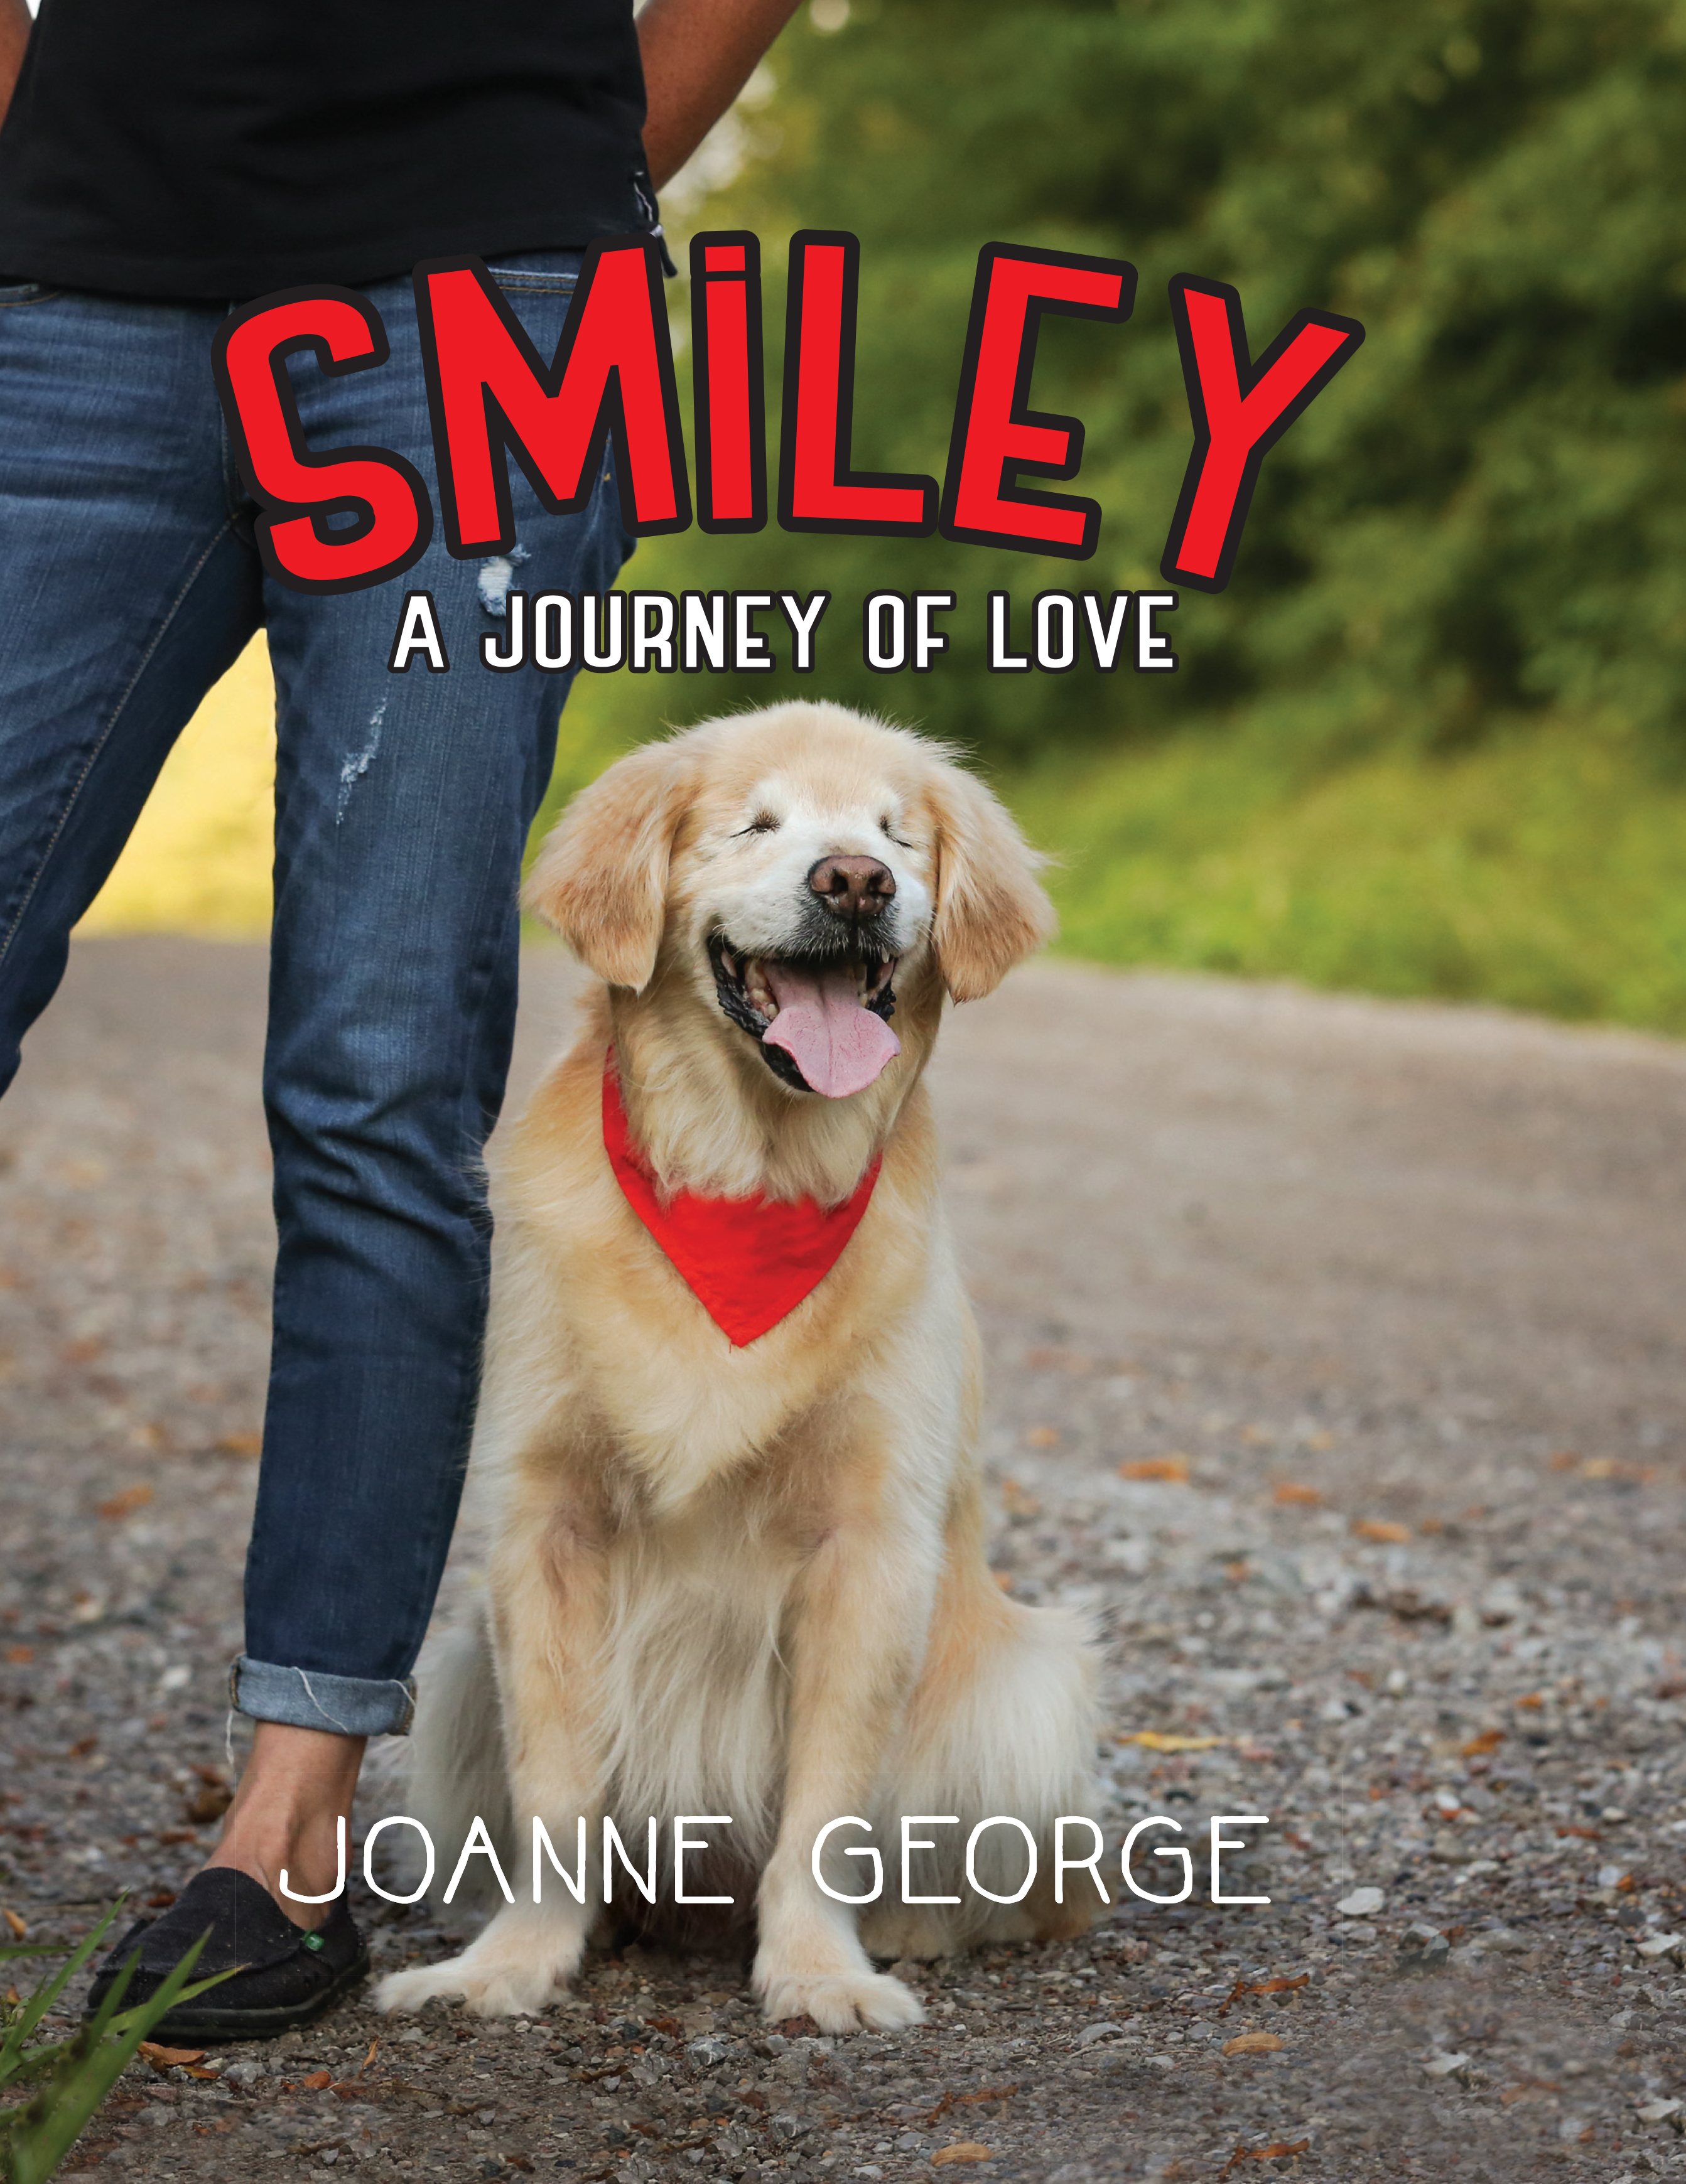 SMILEY: A Journey of Love